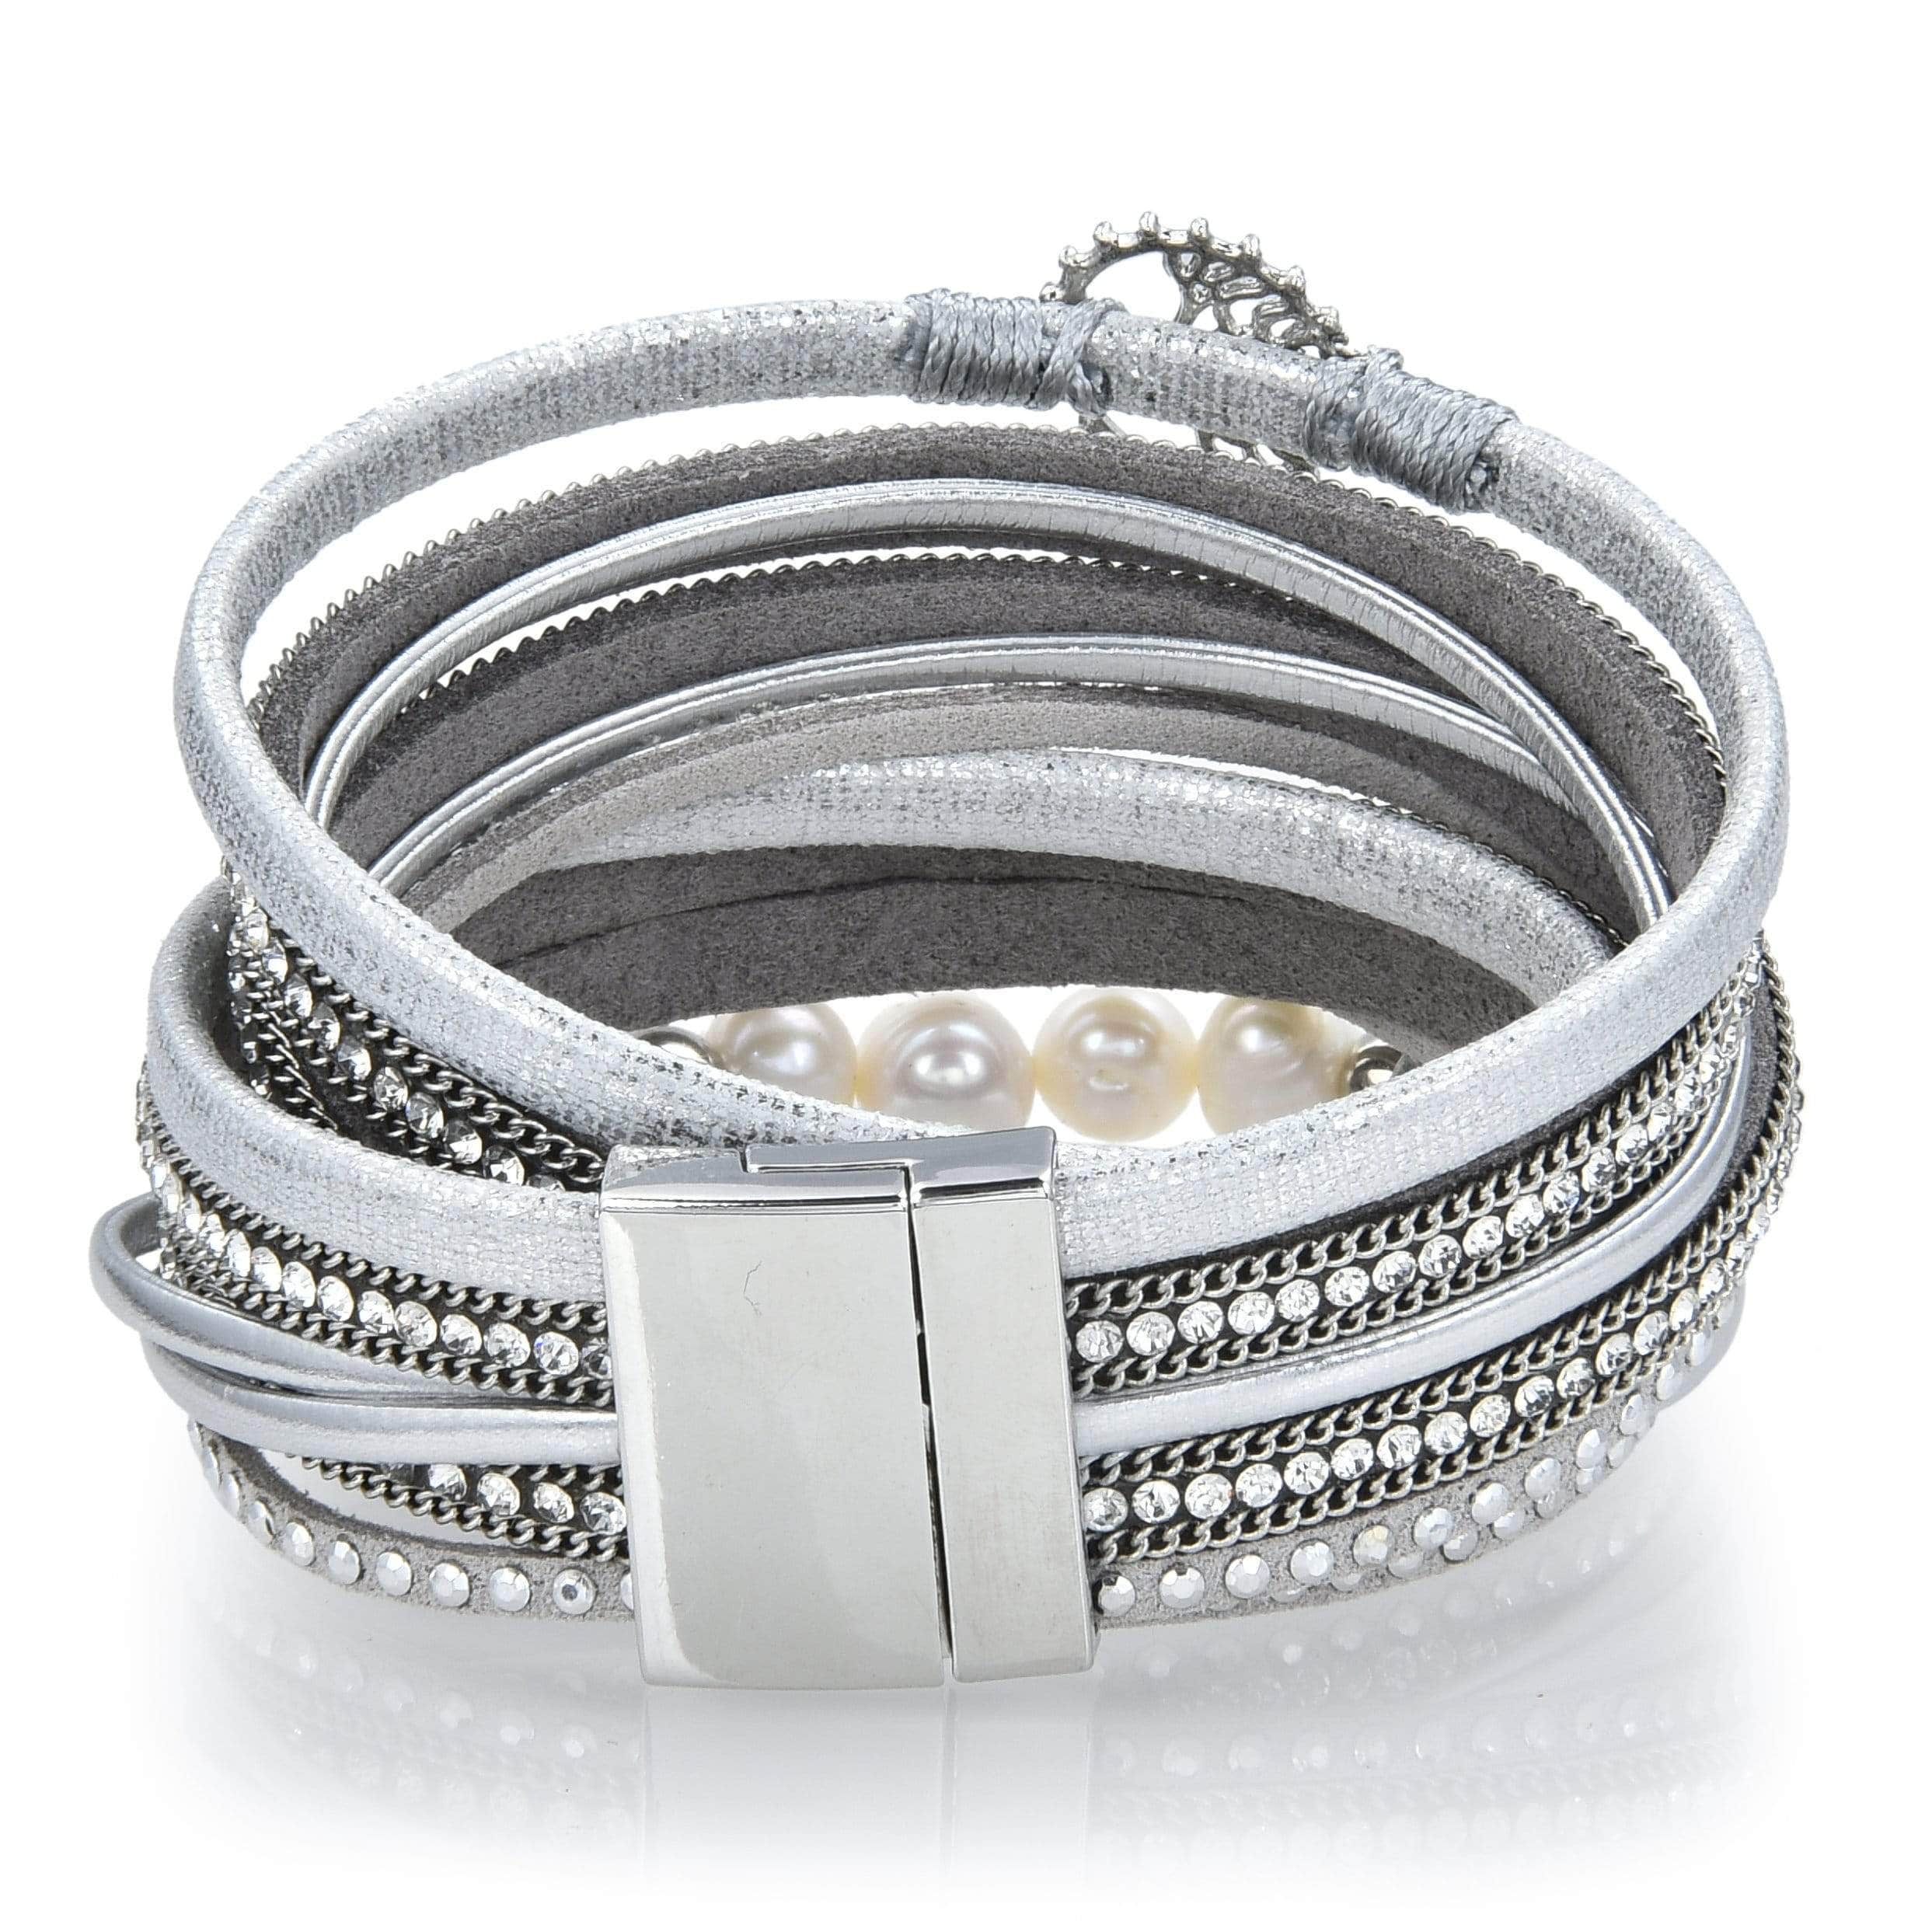 Kalifano Multiwrap Bracelets Multiple Strand Bracelet with Tree of Life Design Silver With Magnetic Clasp BMW-25-SR